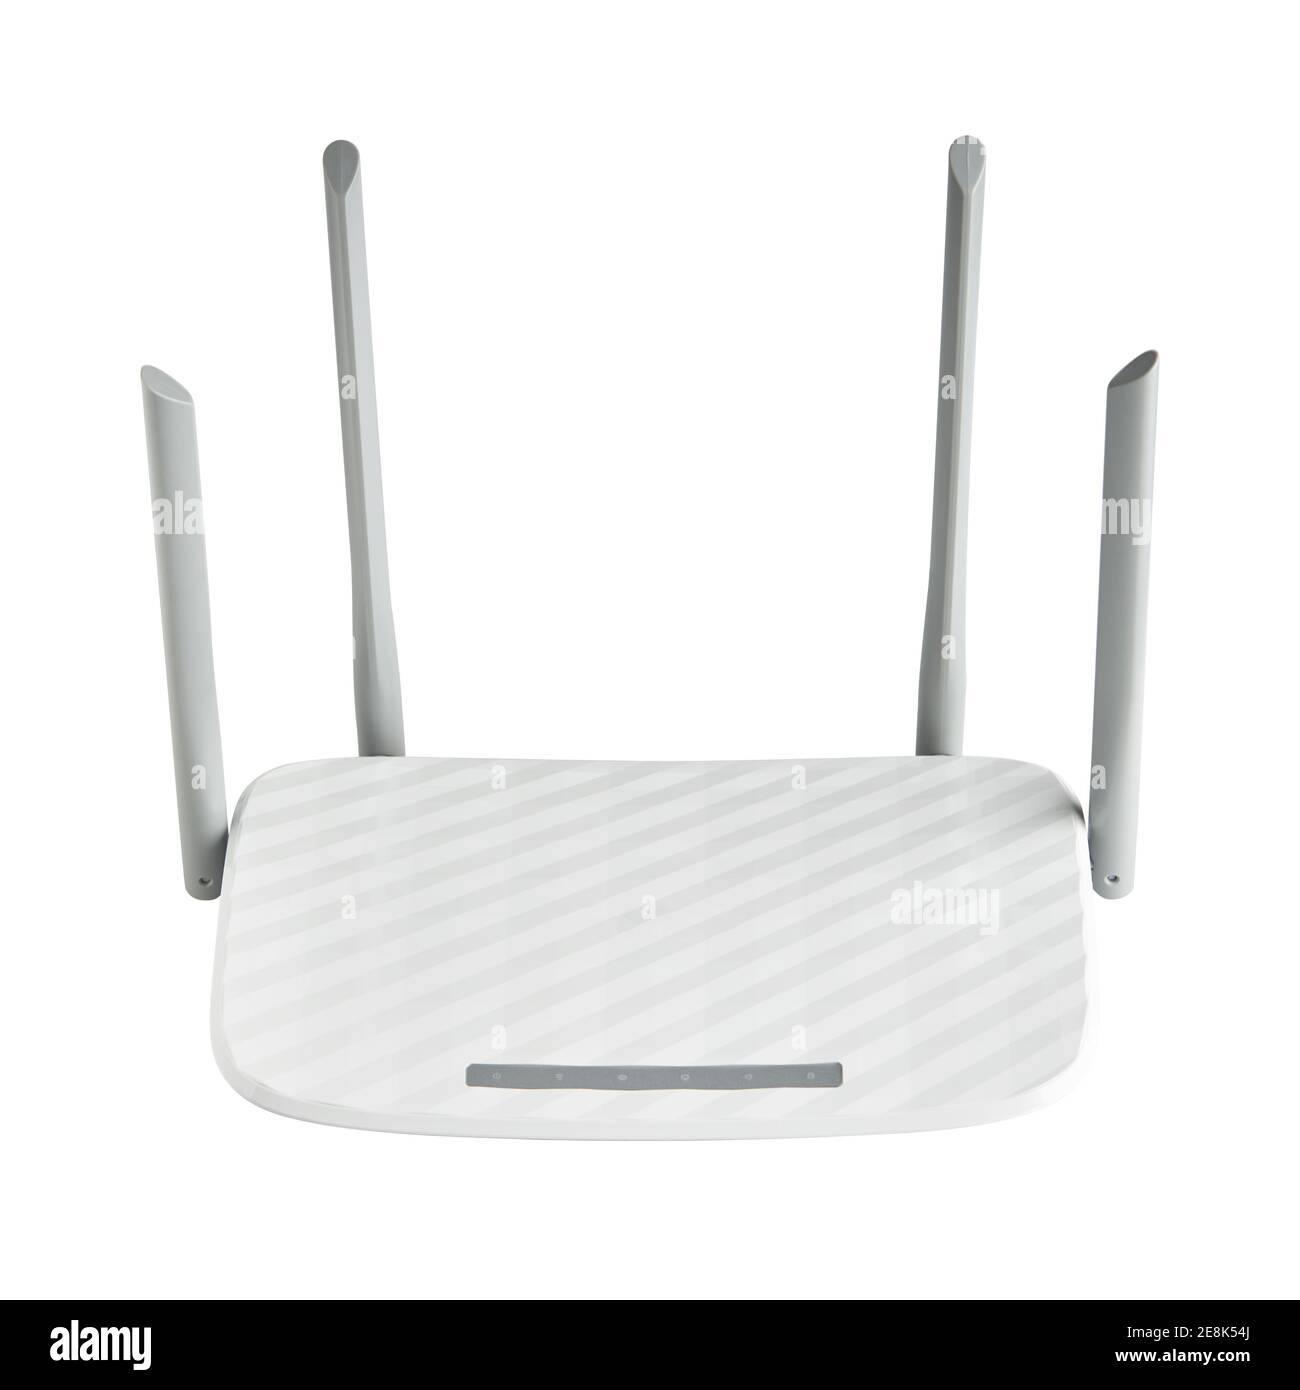 white wireless router with four antennas isolated on white background. modern communication web and internet technologies concept Stock Photo